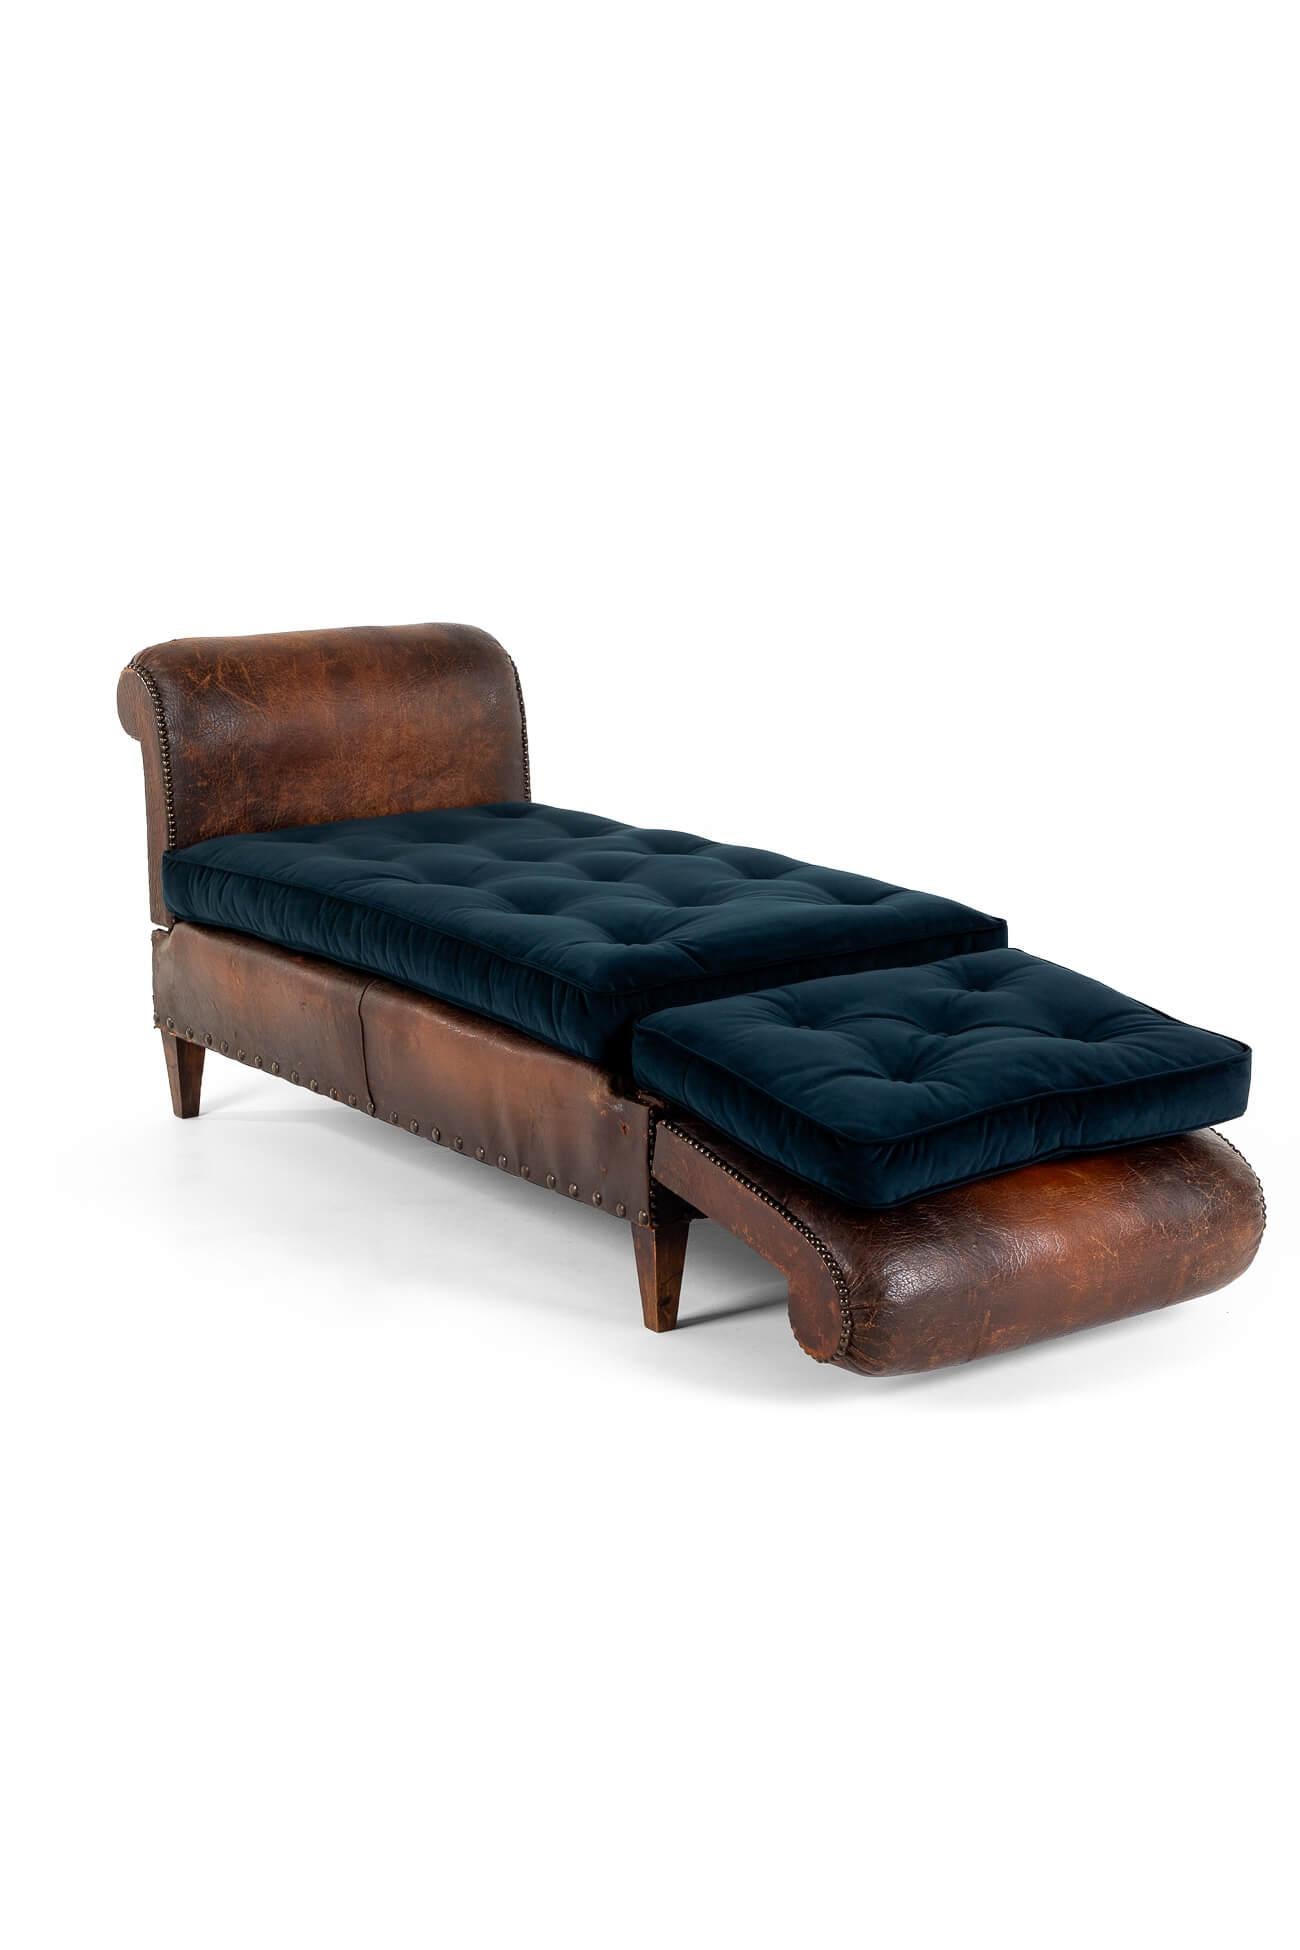 Art Deco French Leather Daybed For Sale